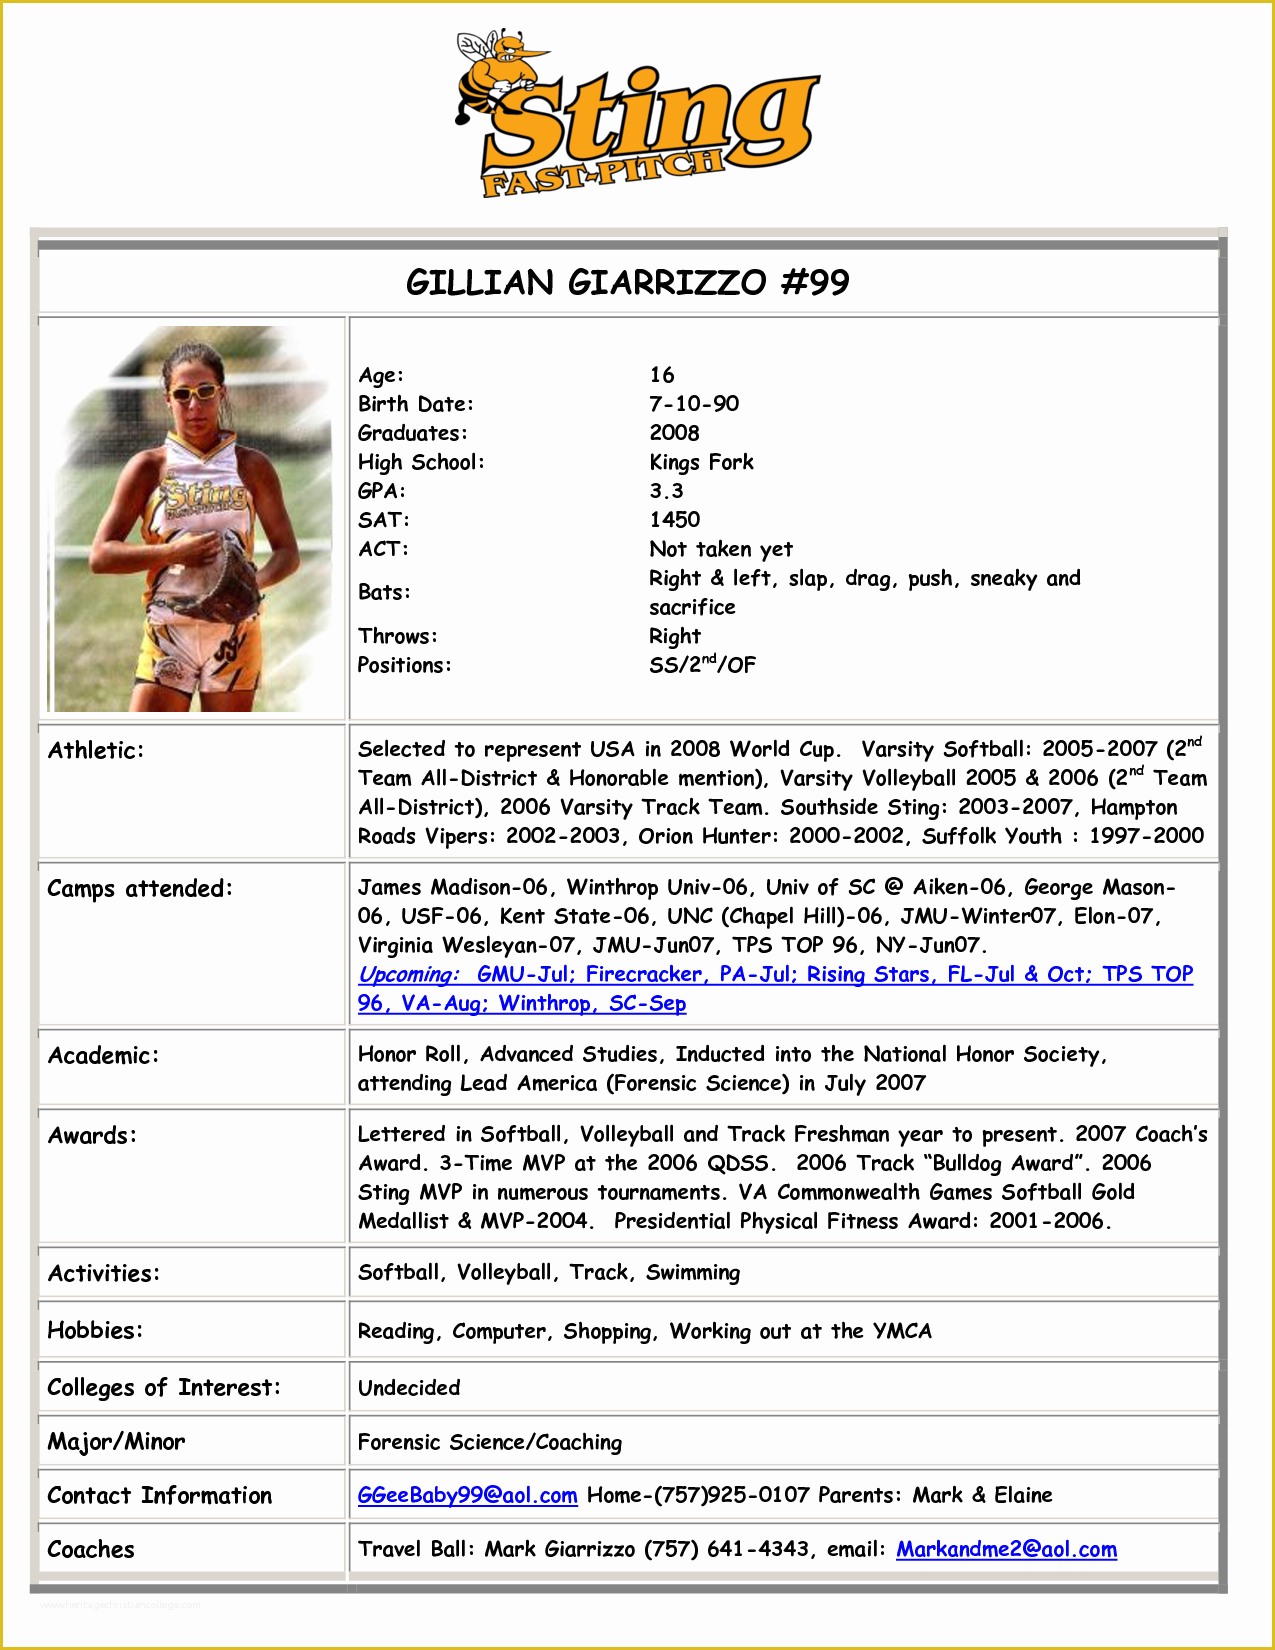 Softball Profile Template Free Of 28 Of High School soccer Player Profile Template